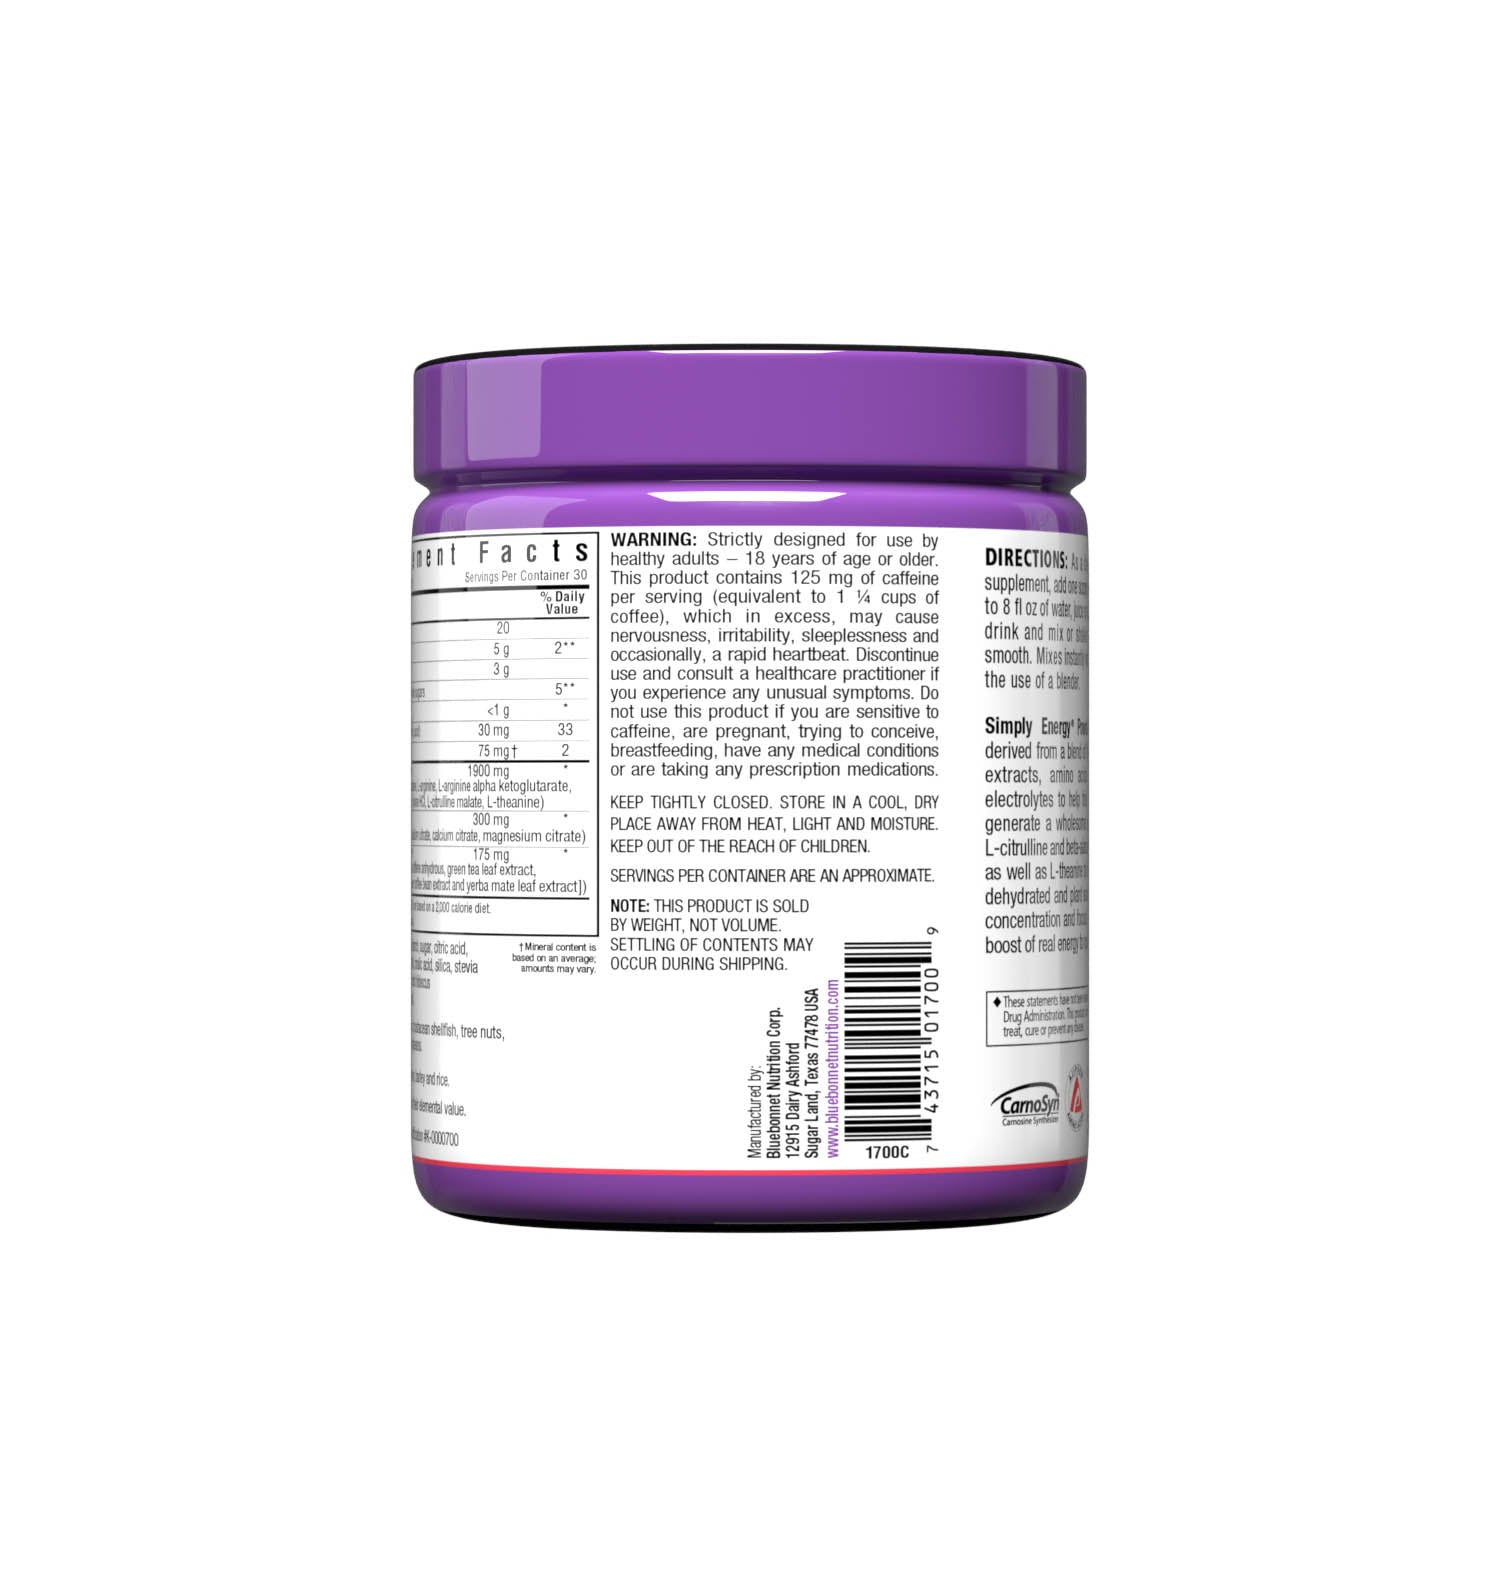 Simply Energy Powder is derived from a blend of herbal extracts, amino acids and electrolytes to help the body generate a wholesome surge of energy. The amino acids, L-arginine, L-citrulline and beta-alanine, have been incorporated to enhance blood flow, as well as theanine to help the mind reach optimal mental clarity. Supplement facts panel 2. #size_10.58 oz